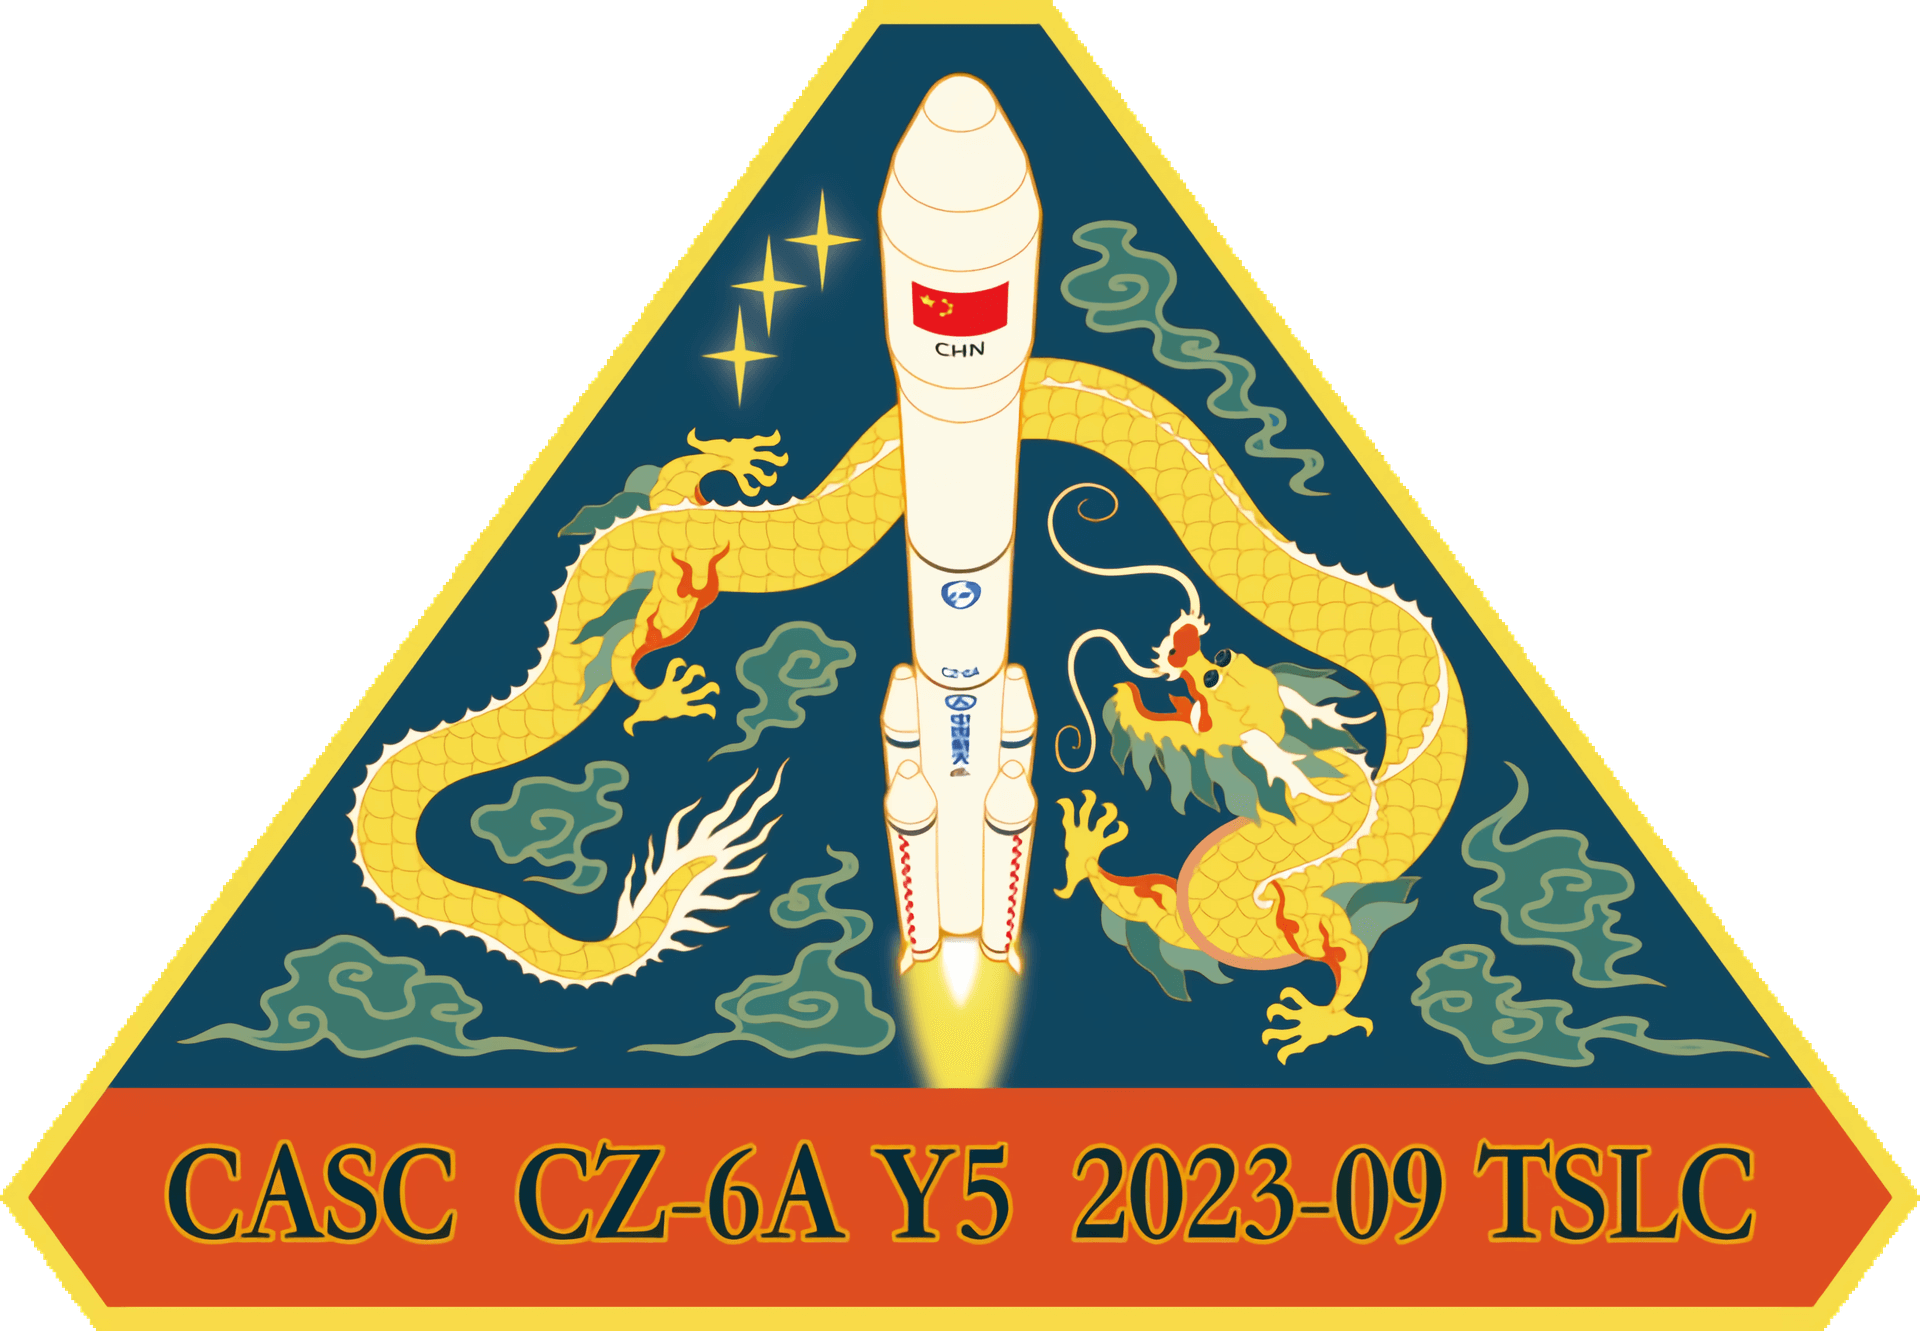 Mission patch for Yaogan 40